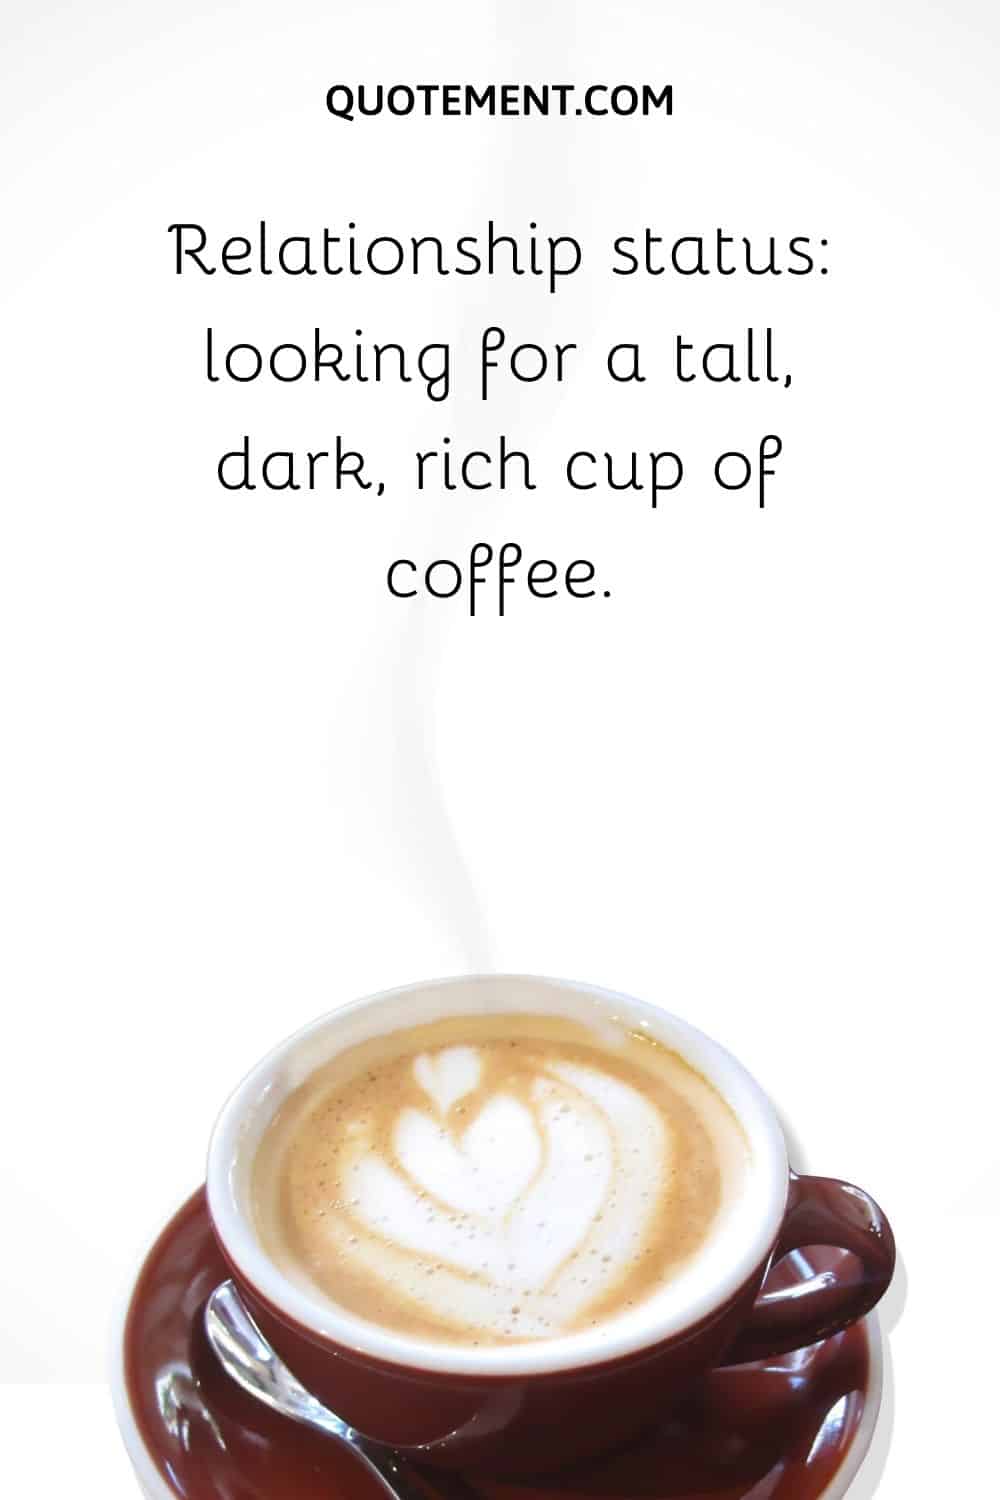 Relationship status looking for a tall, dark, rich cup of coffee